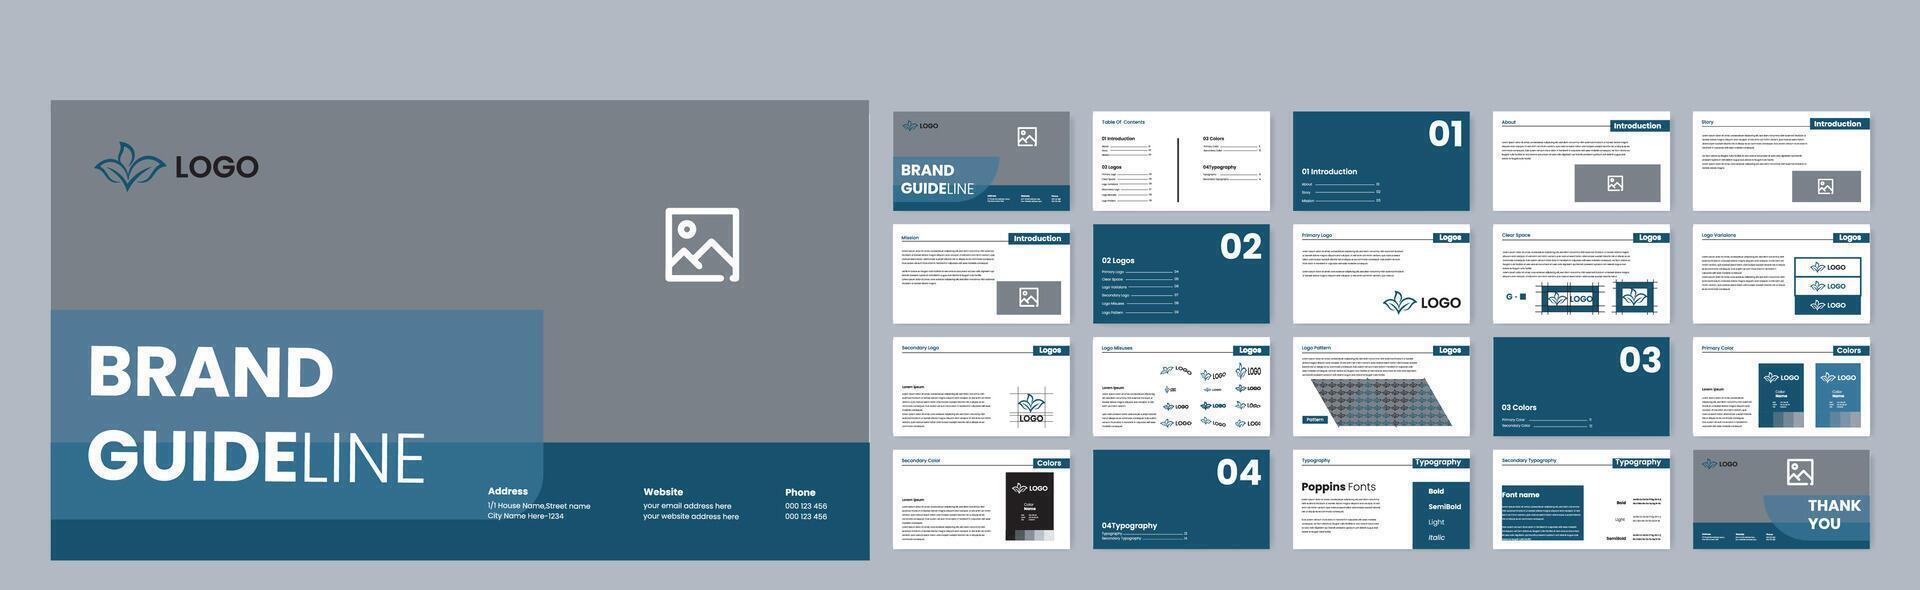 Brand Guidelines Template vector